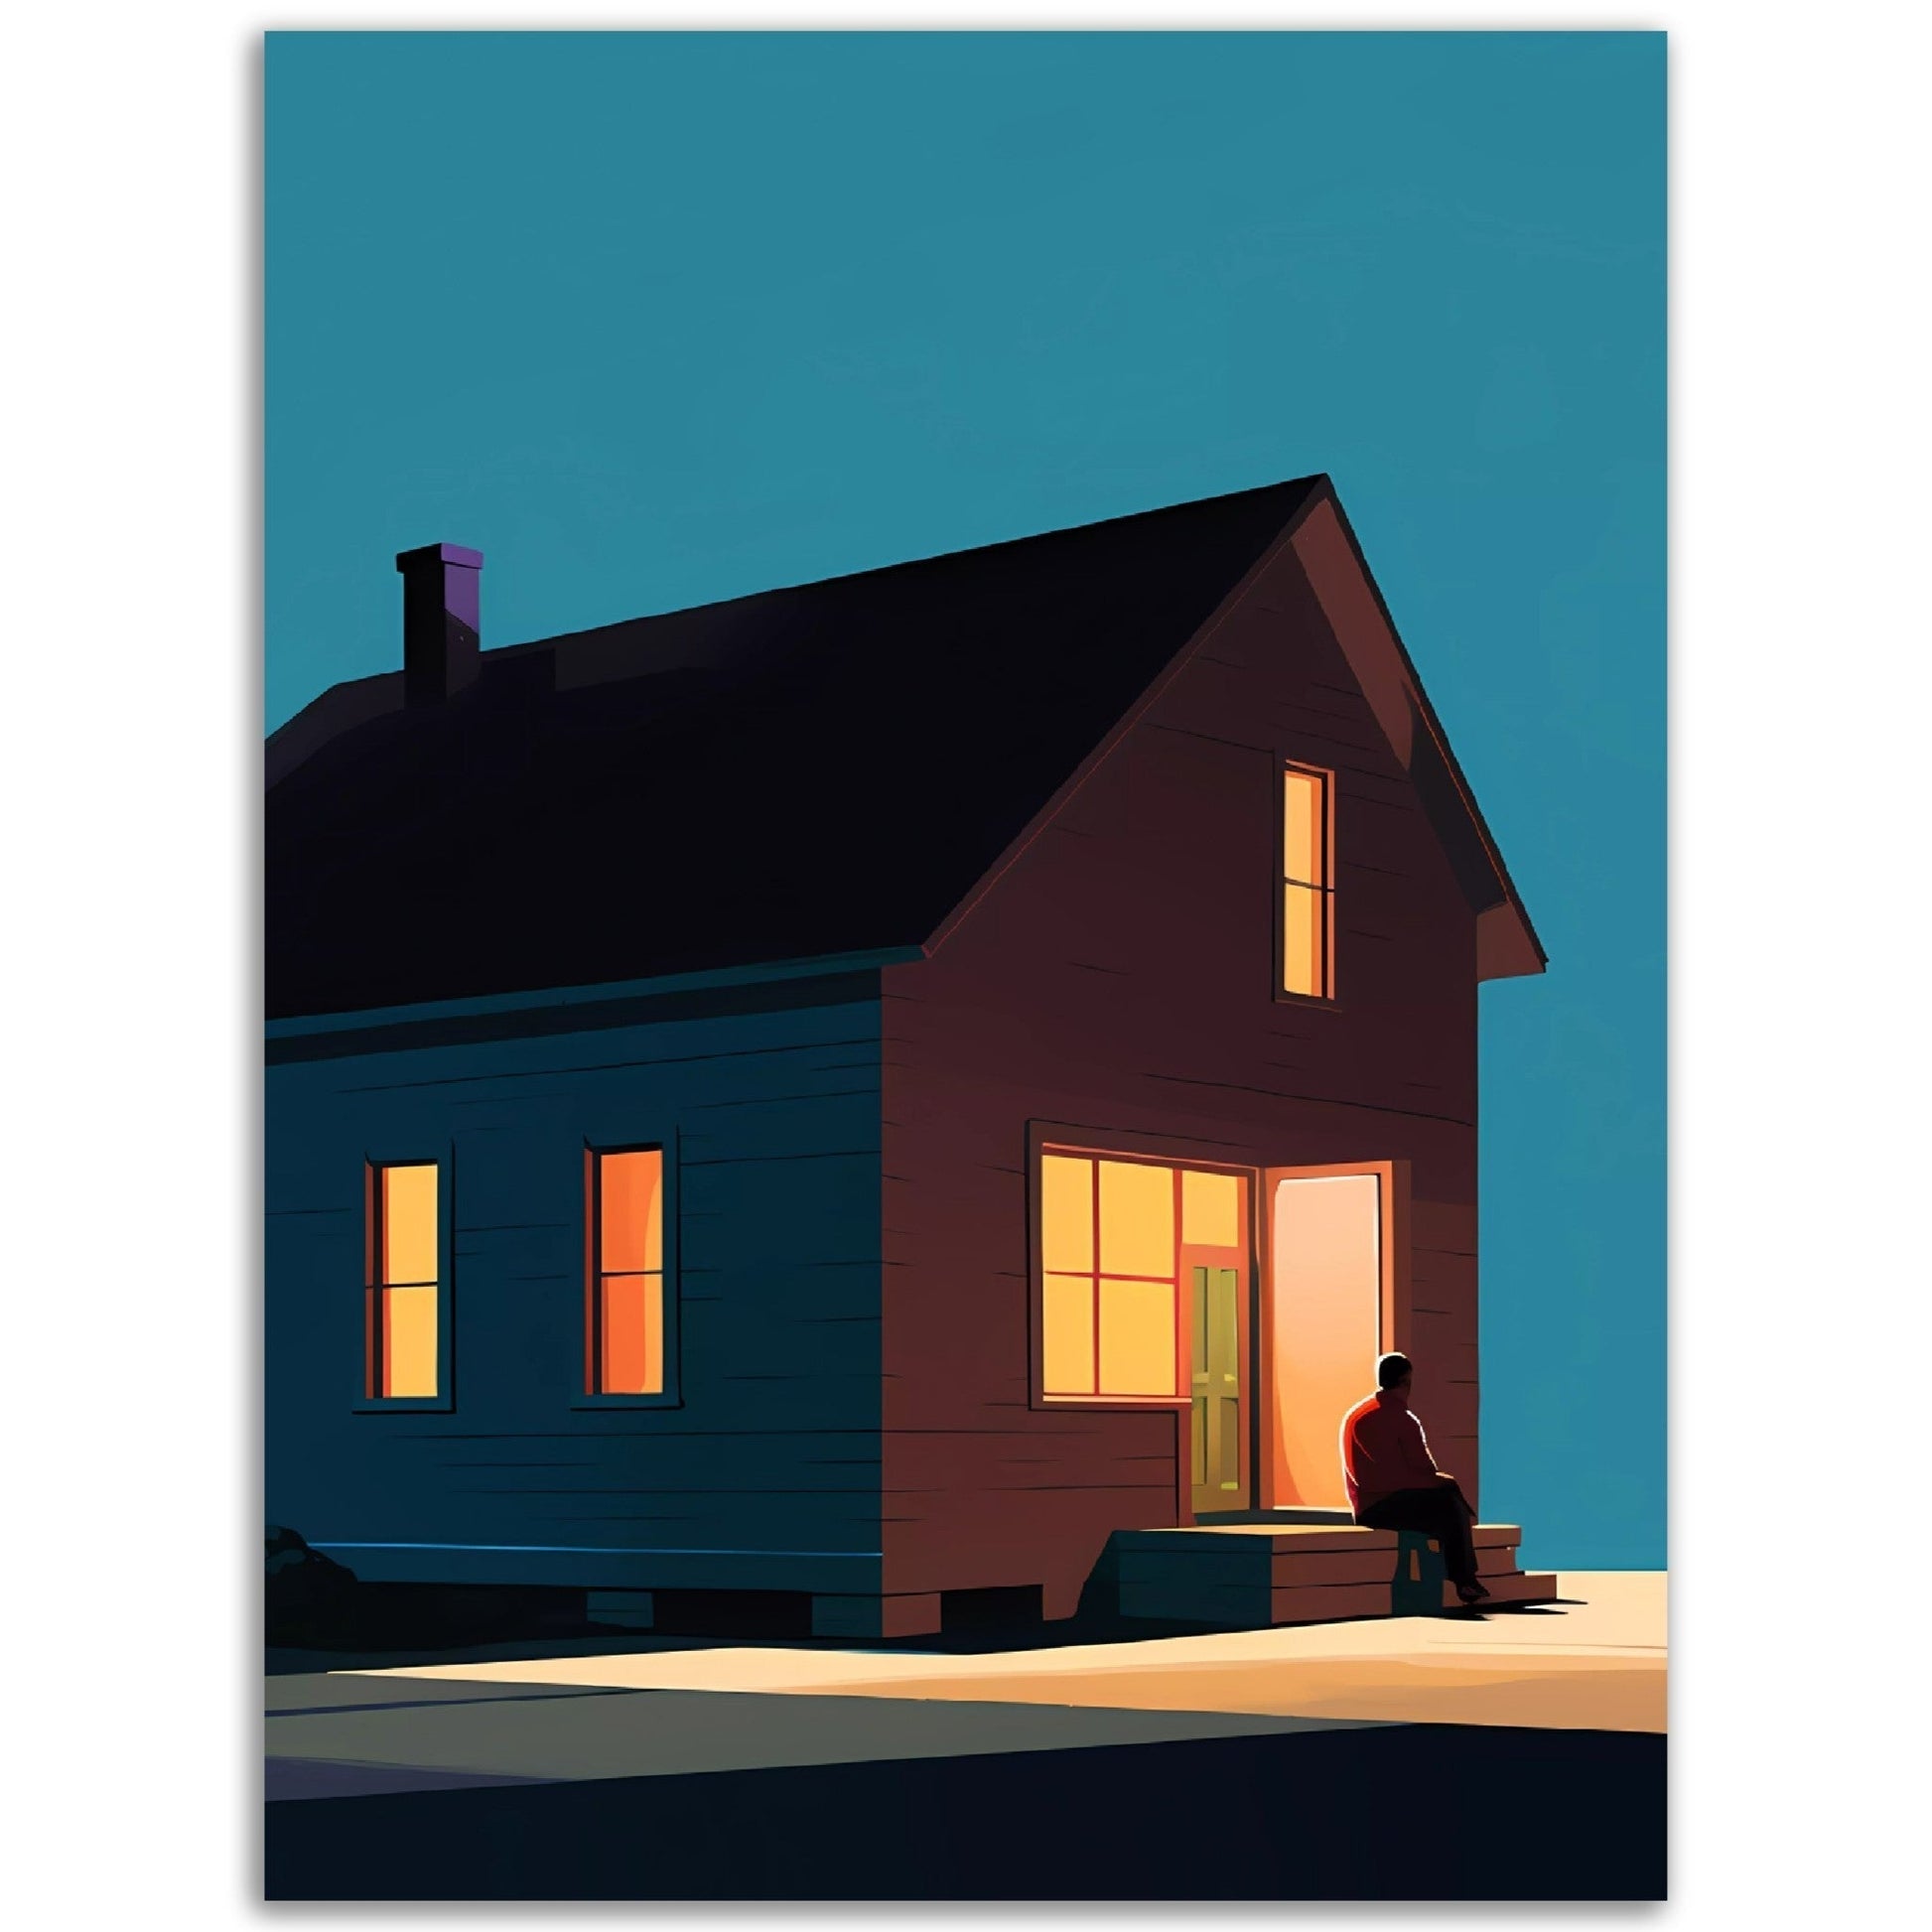 A mesmerizing illustration of a man sitting outside a house at night, perfect for adding a touch of elegance to your walls with The World Collapse posters.